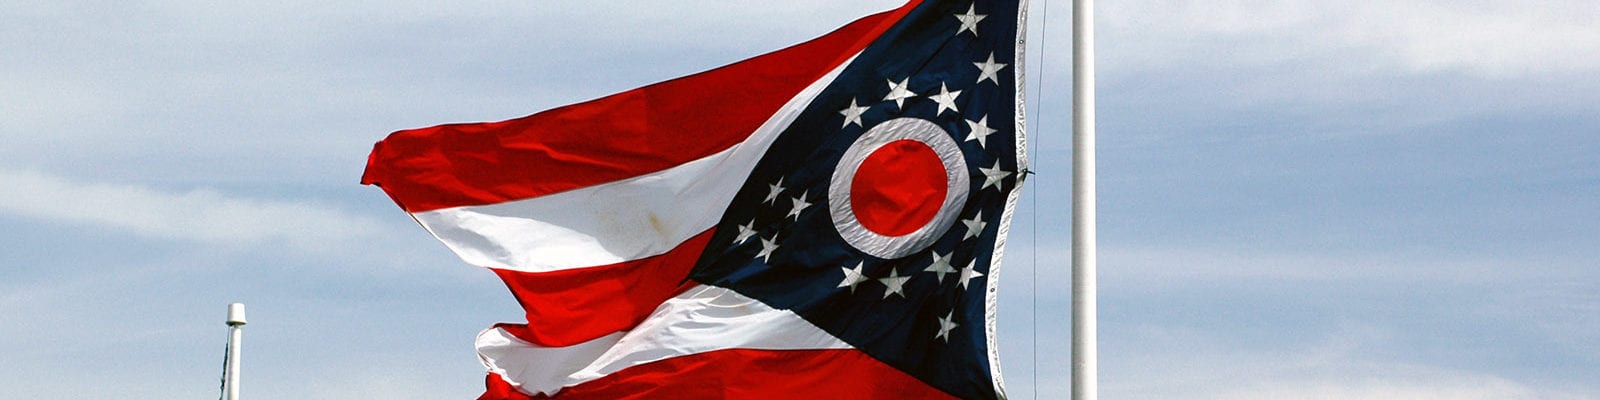 The Ohio state flag flapping on a windy day in the state's capital city.